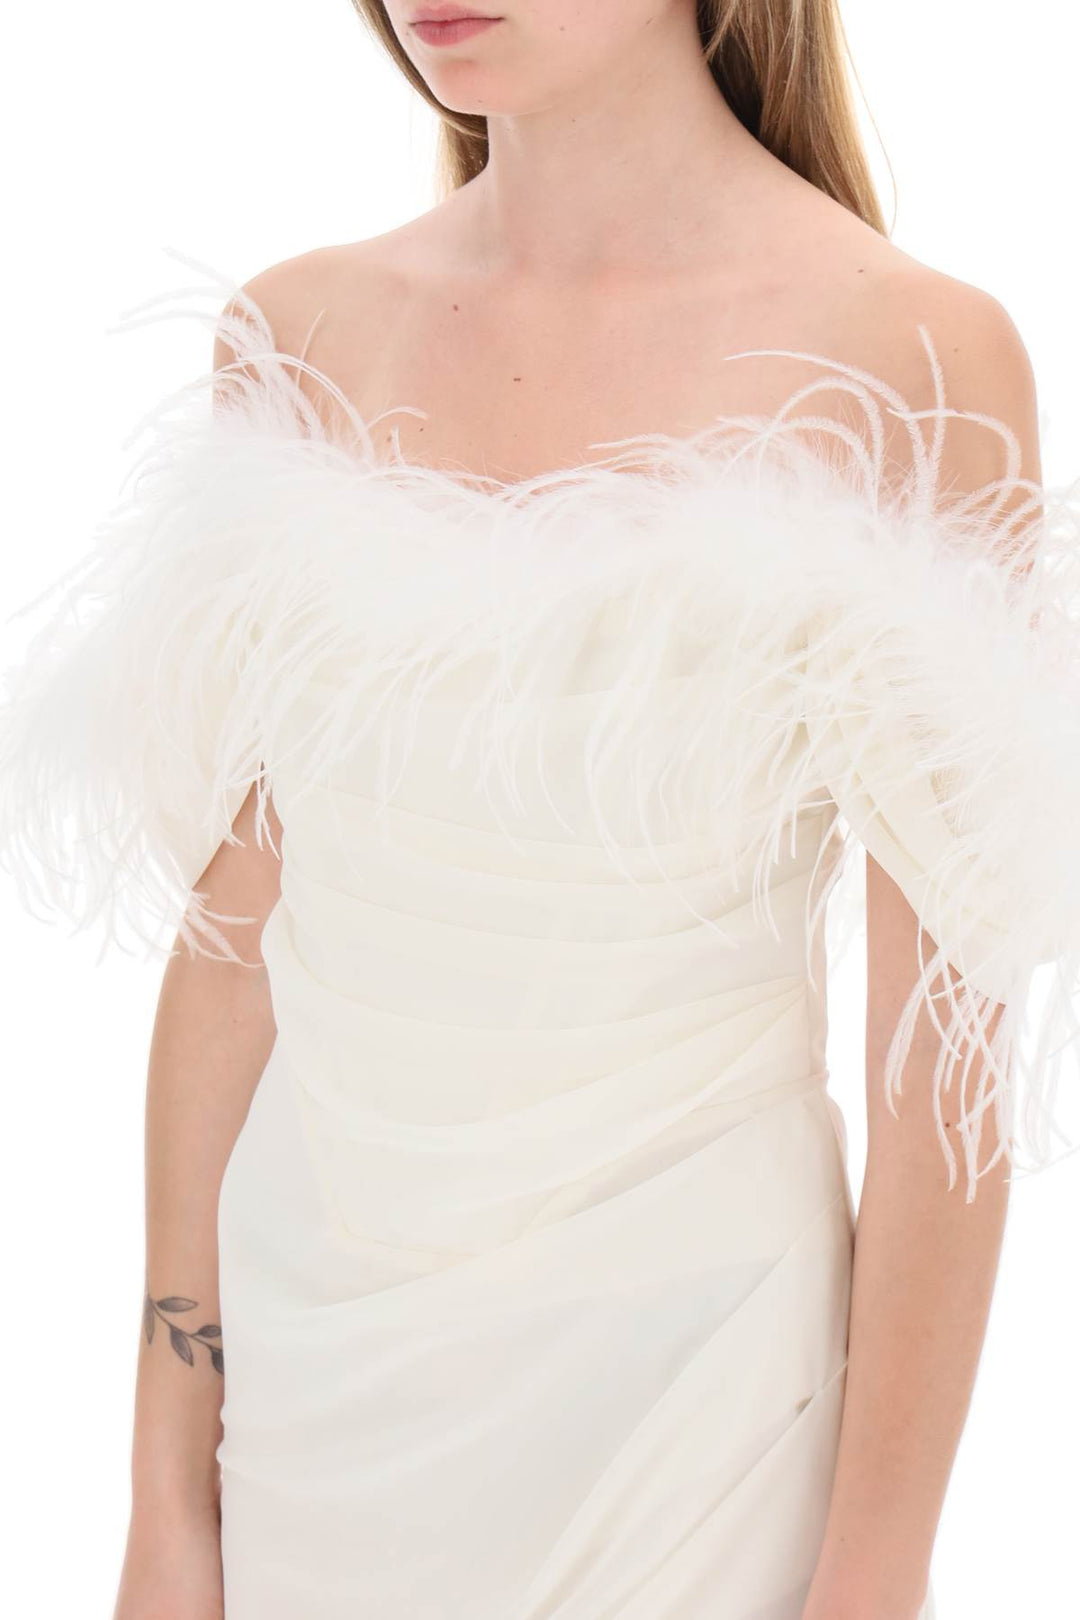 Giuseppe di morabito mini dress in poly georgette with feathers-3